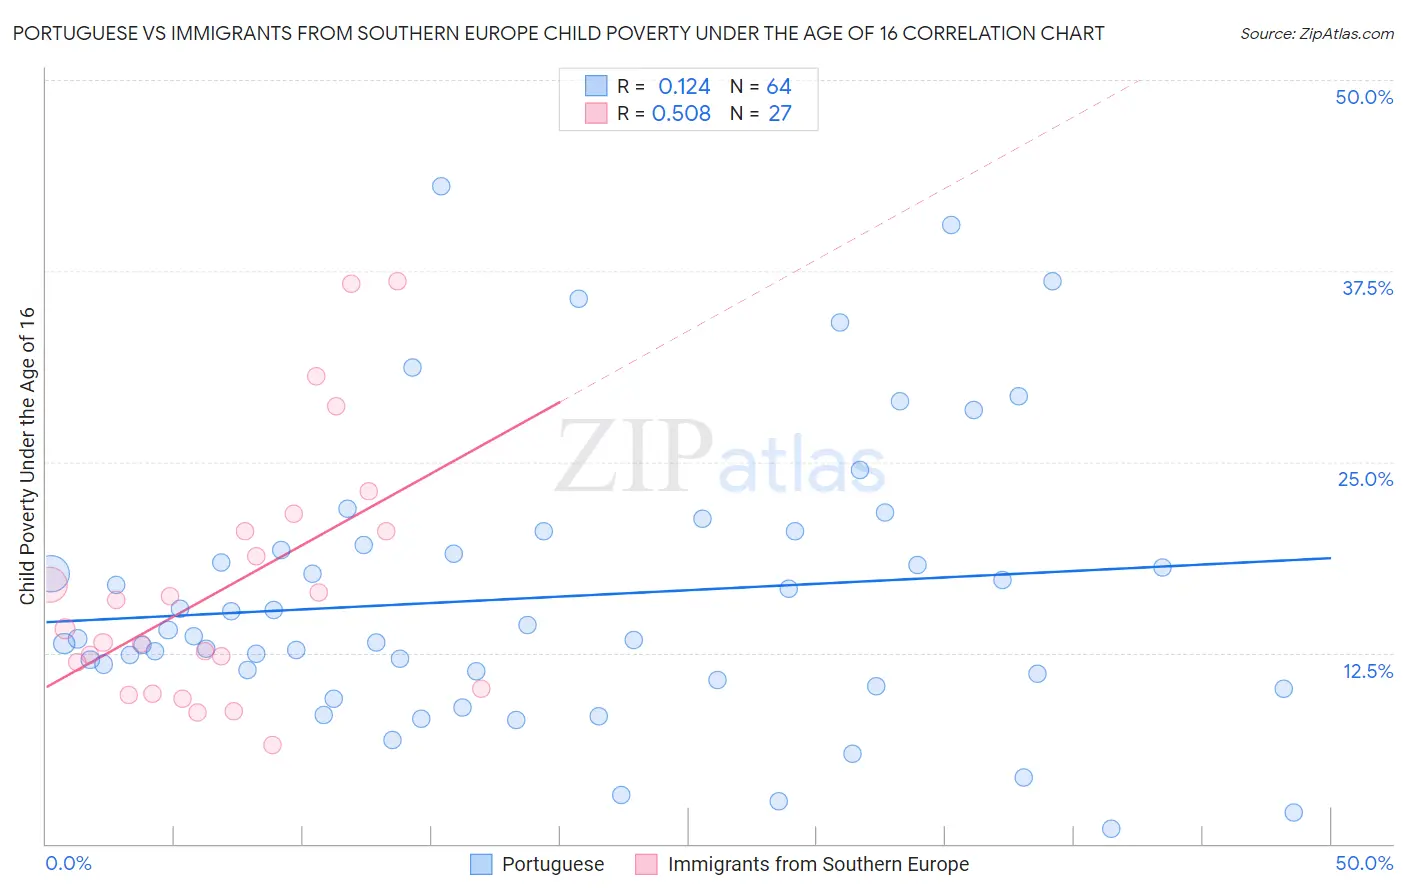 Portuguese vs Immigrants from Southern Europe Child Poverty Under the Age of 16